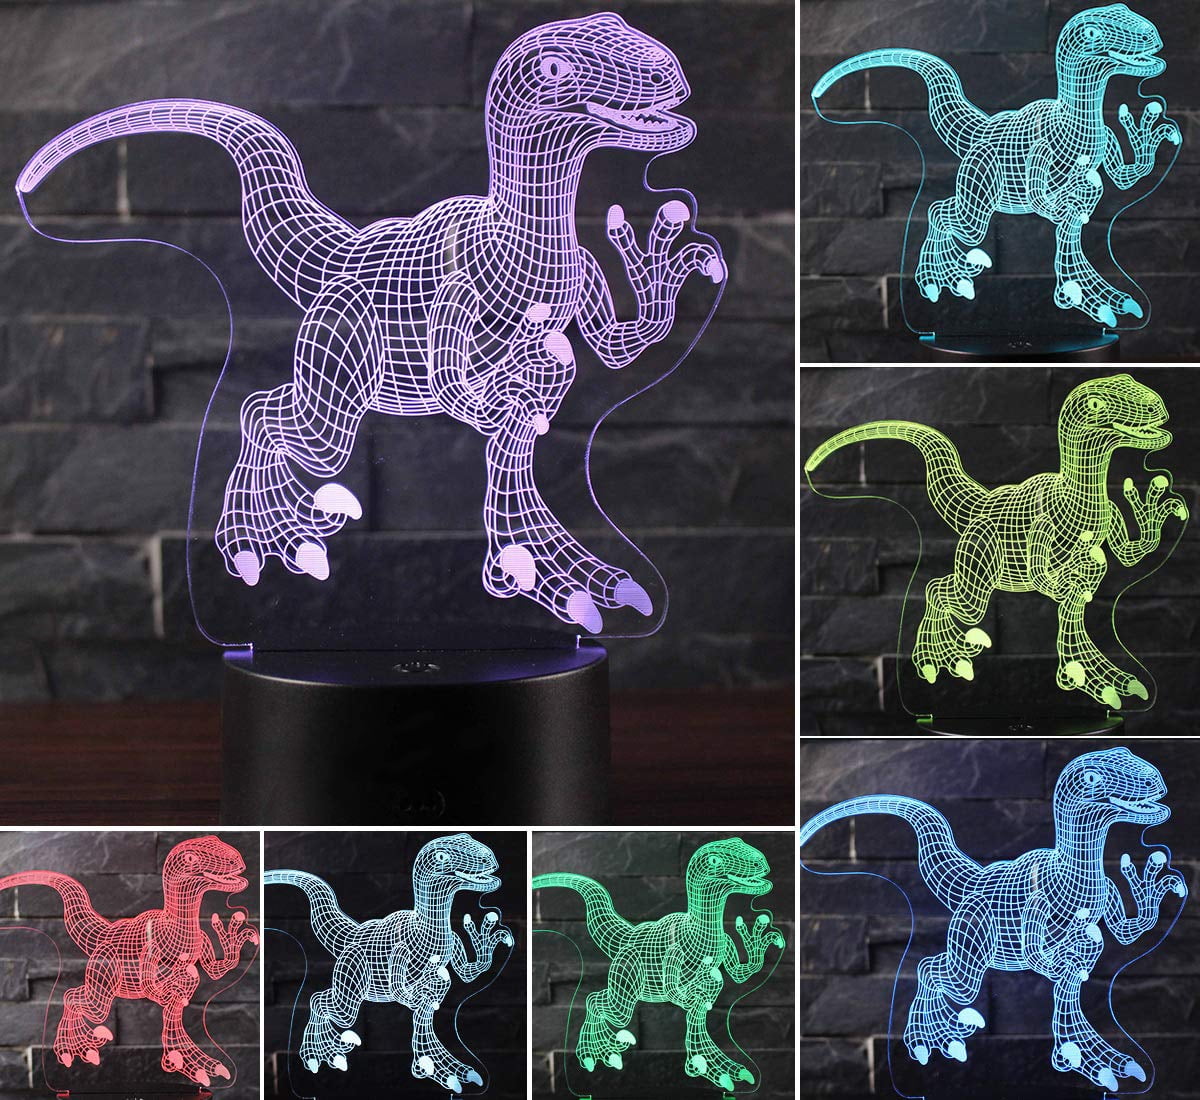 XiaoDing Dinosaur Lamp Kits 3D Night Light Illusion Lamp 4 Patterns with Remote 16 Color Change Decor Lamp Dinosaur Gifts for Children